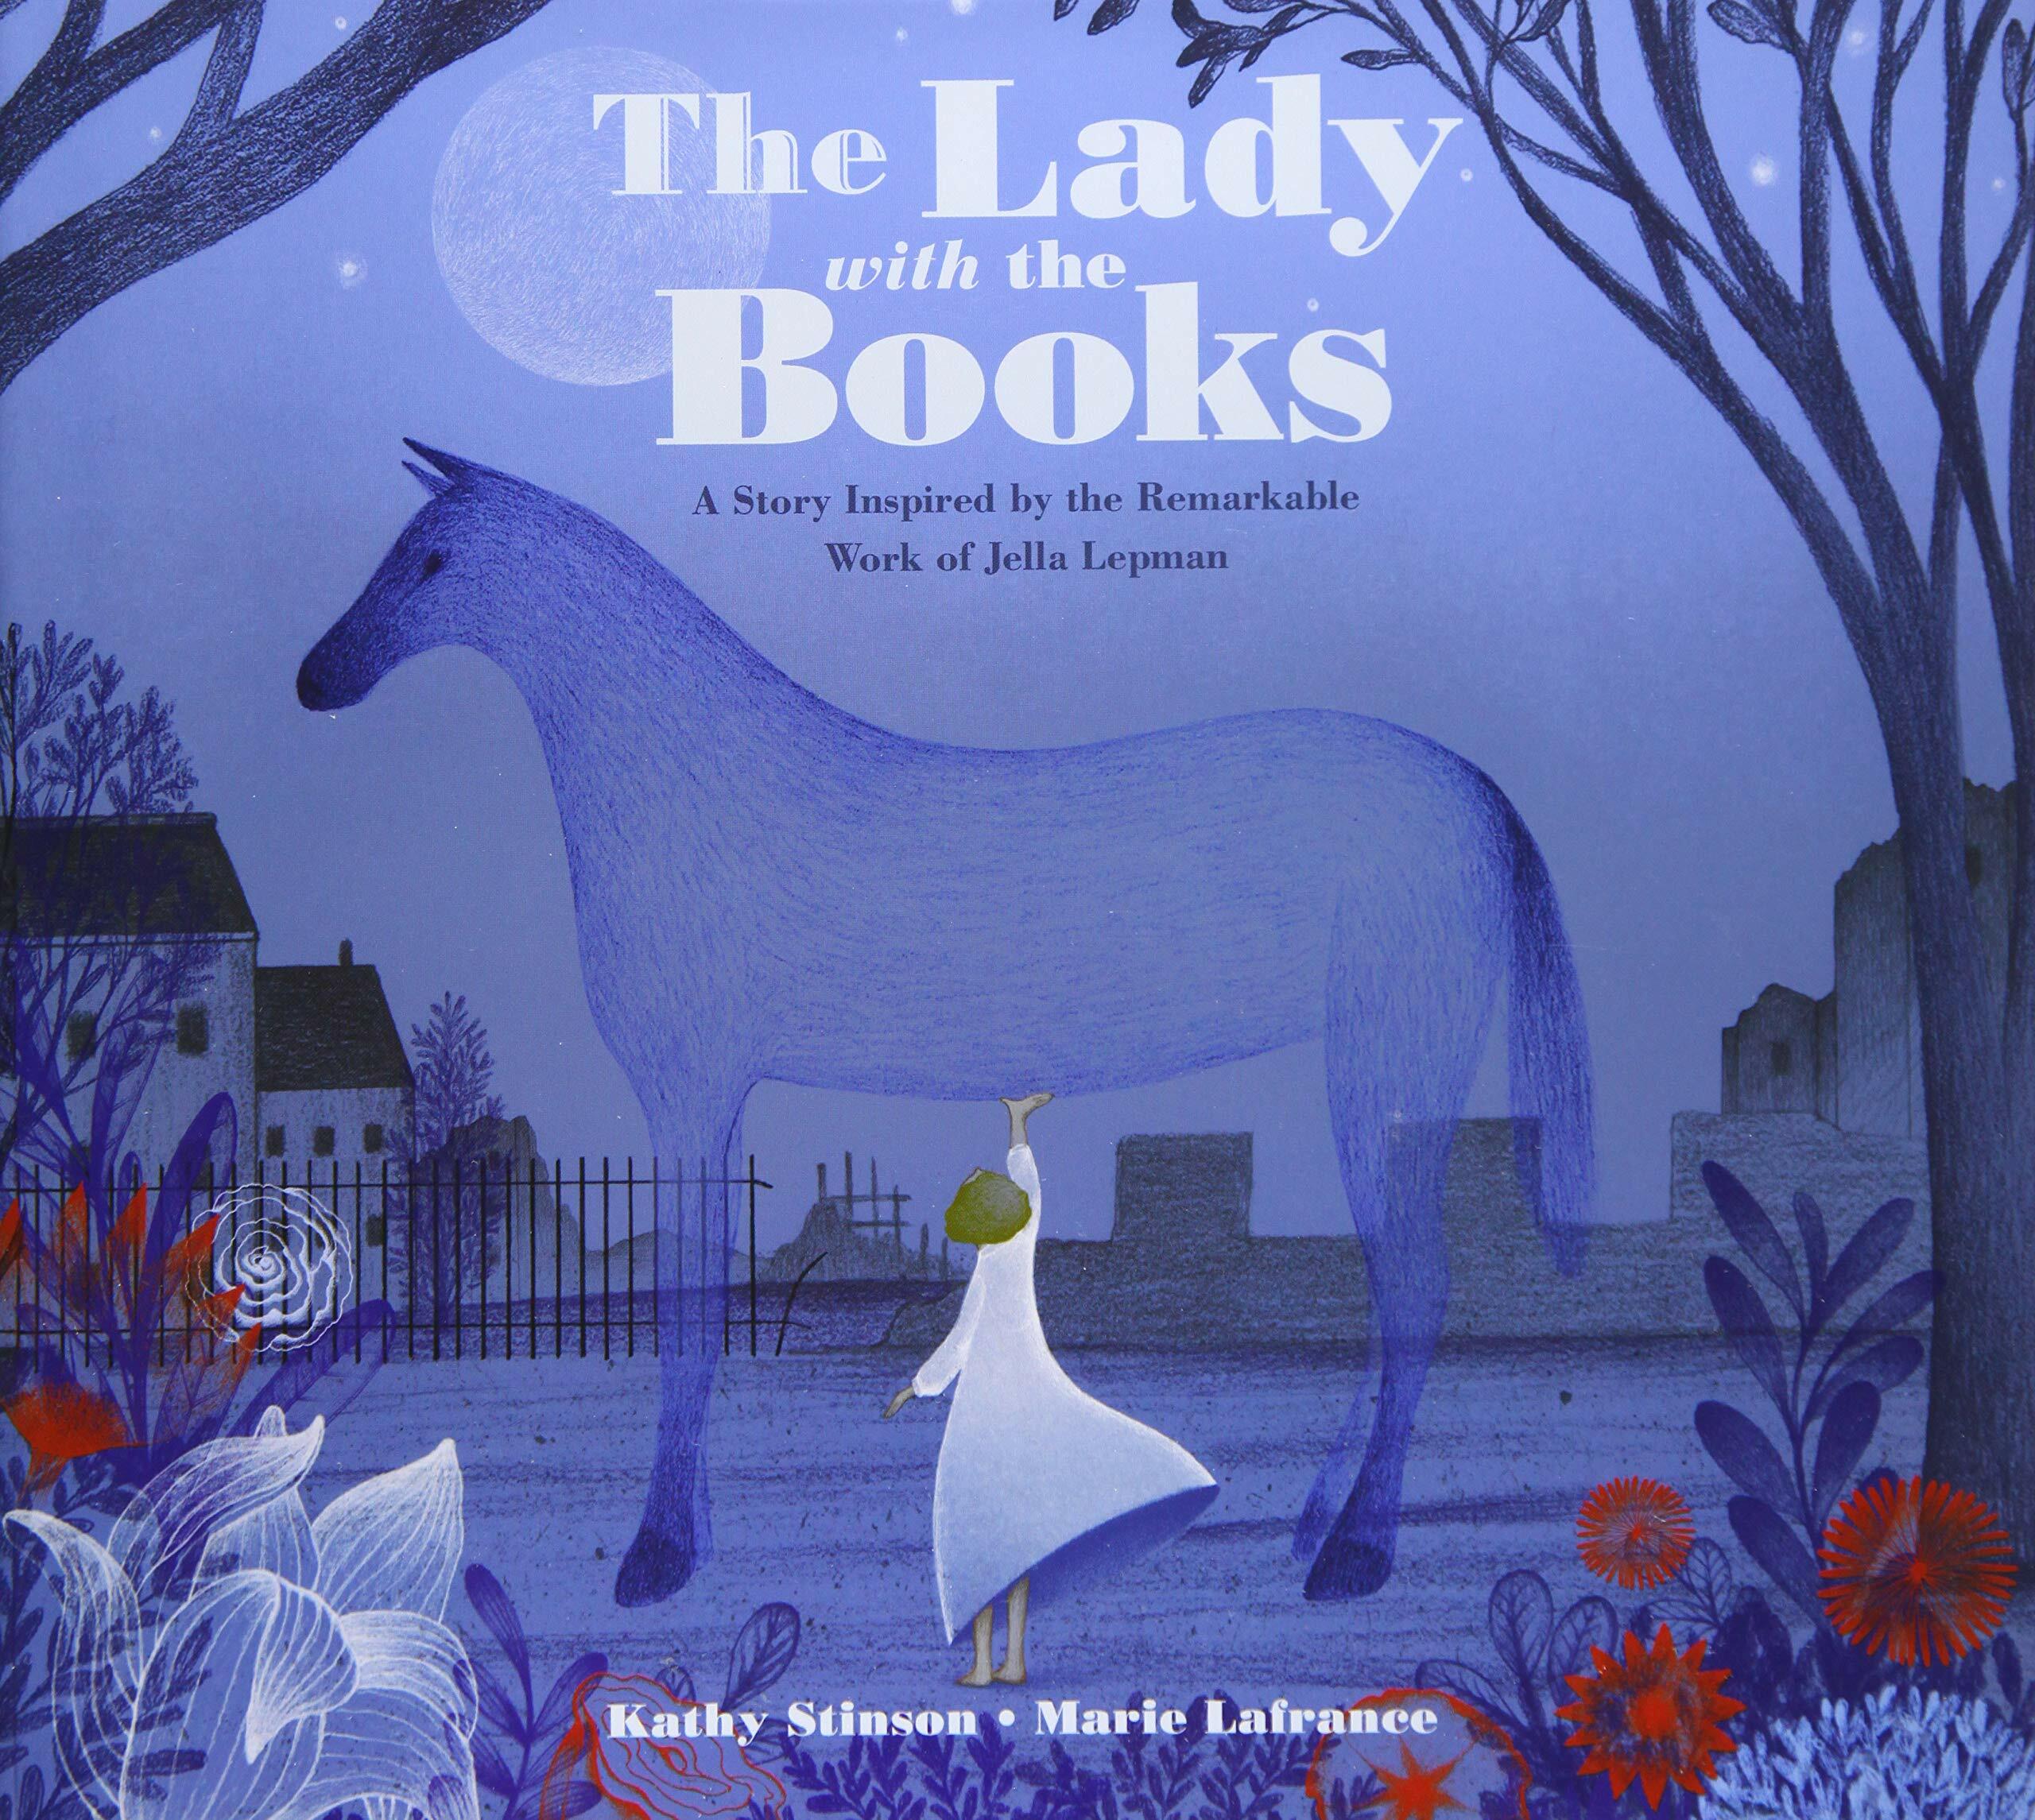 The Lady with the Books: A Story Inspired by the Remarkable Work of Jella Lepman (Hardcover)